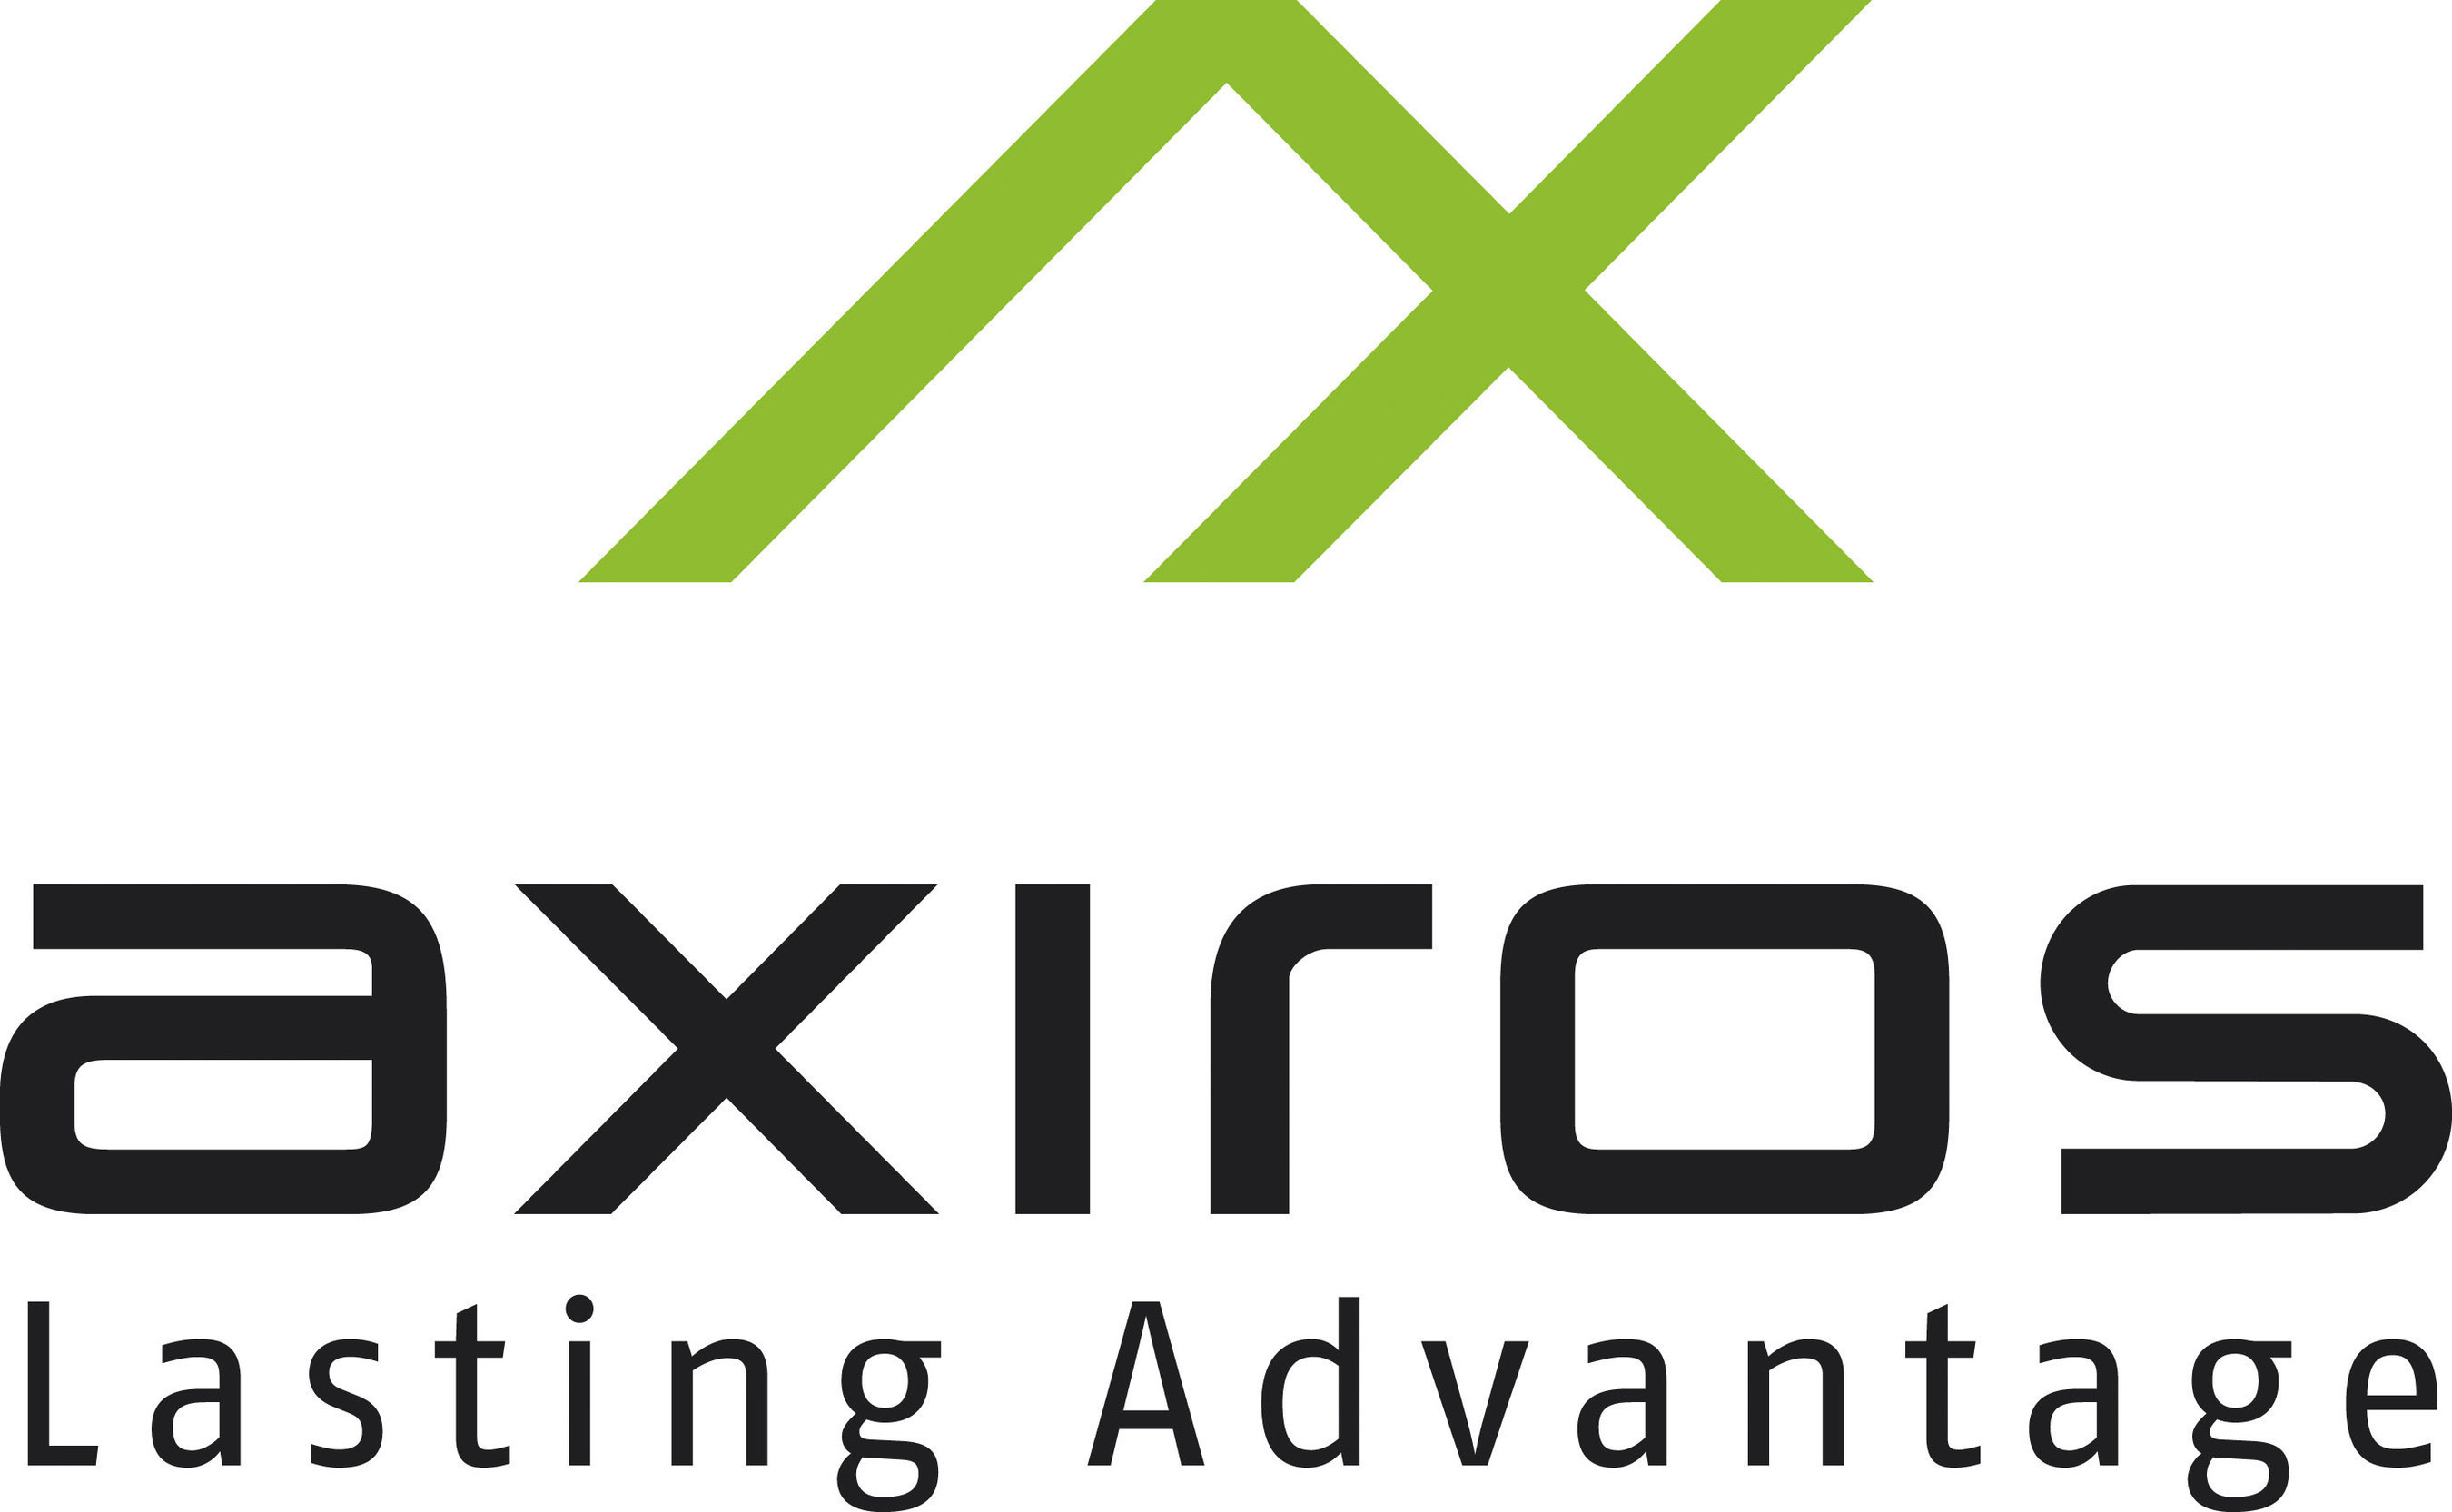 Axiros, the technology leader in device management, TR-069, and IoT solutions for service providers, enterprises, and OEMs. www.axiros.com